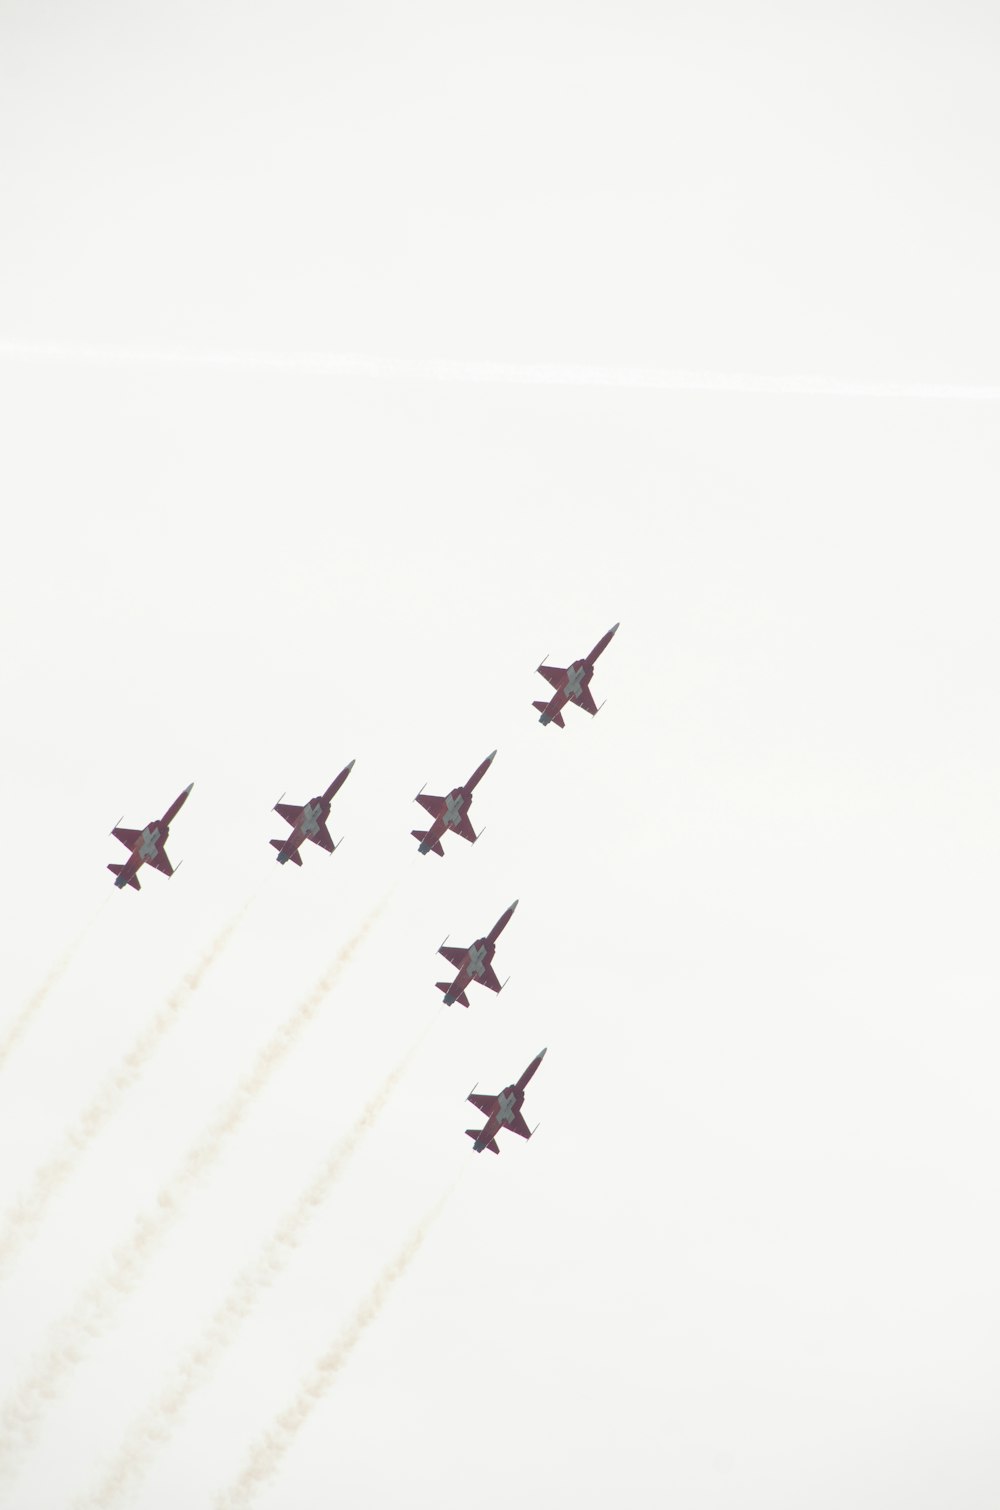 a group of jets flying in formation in the sky